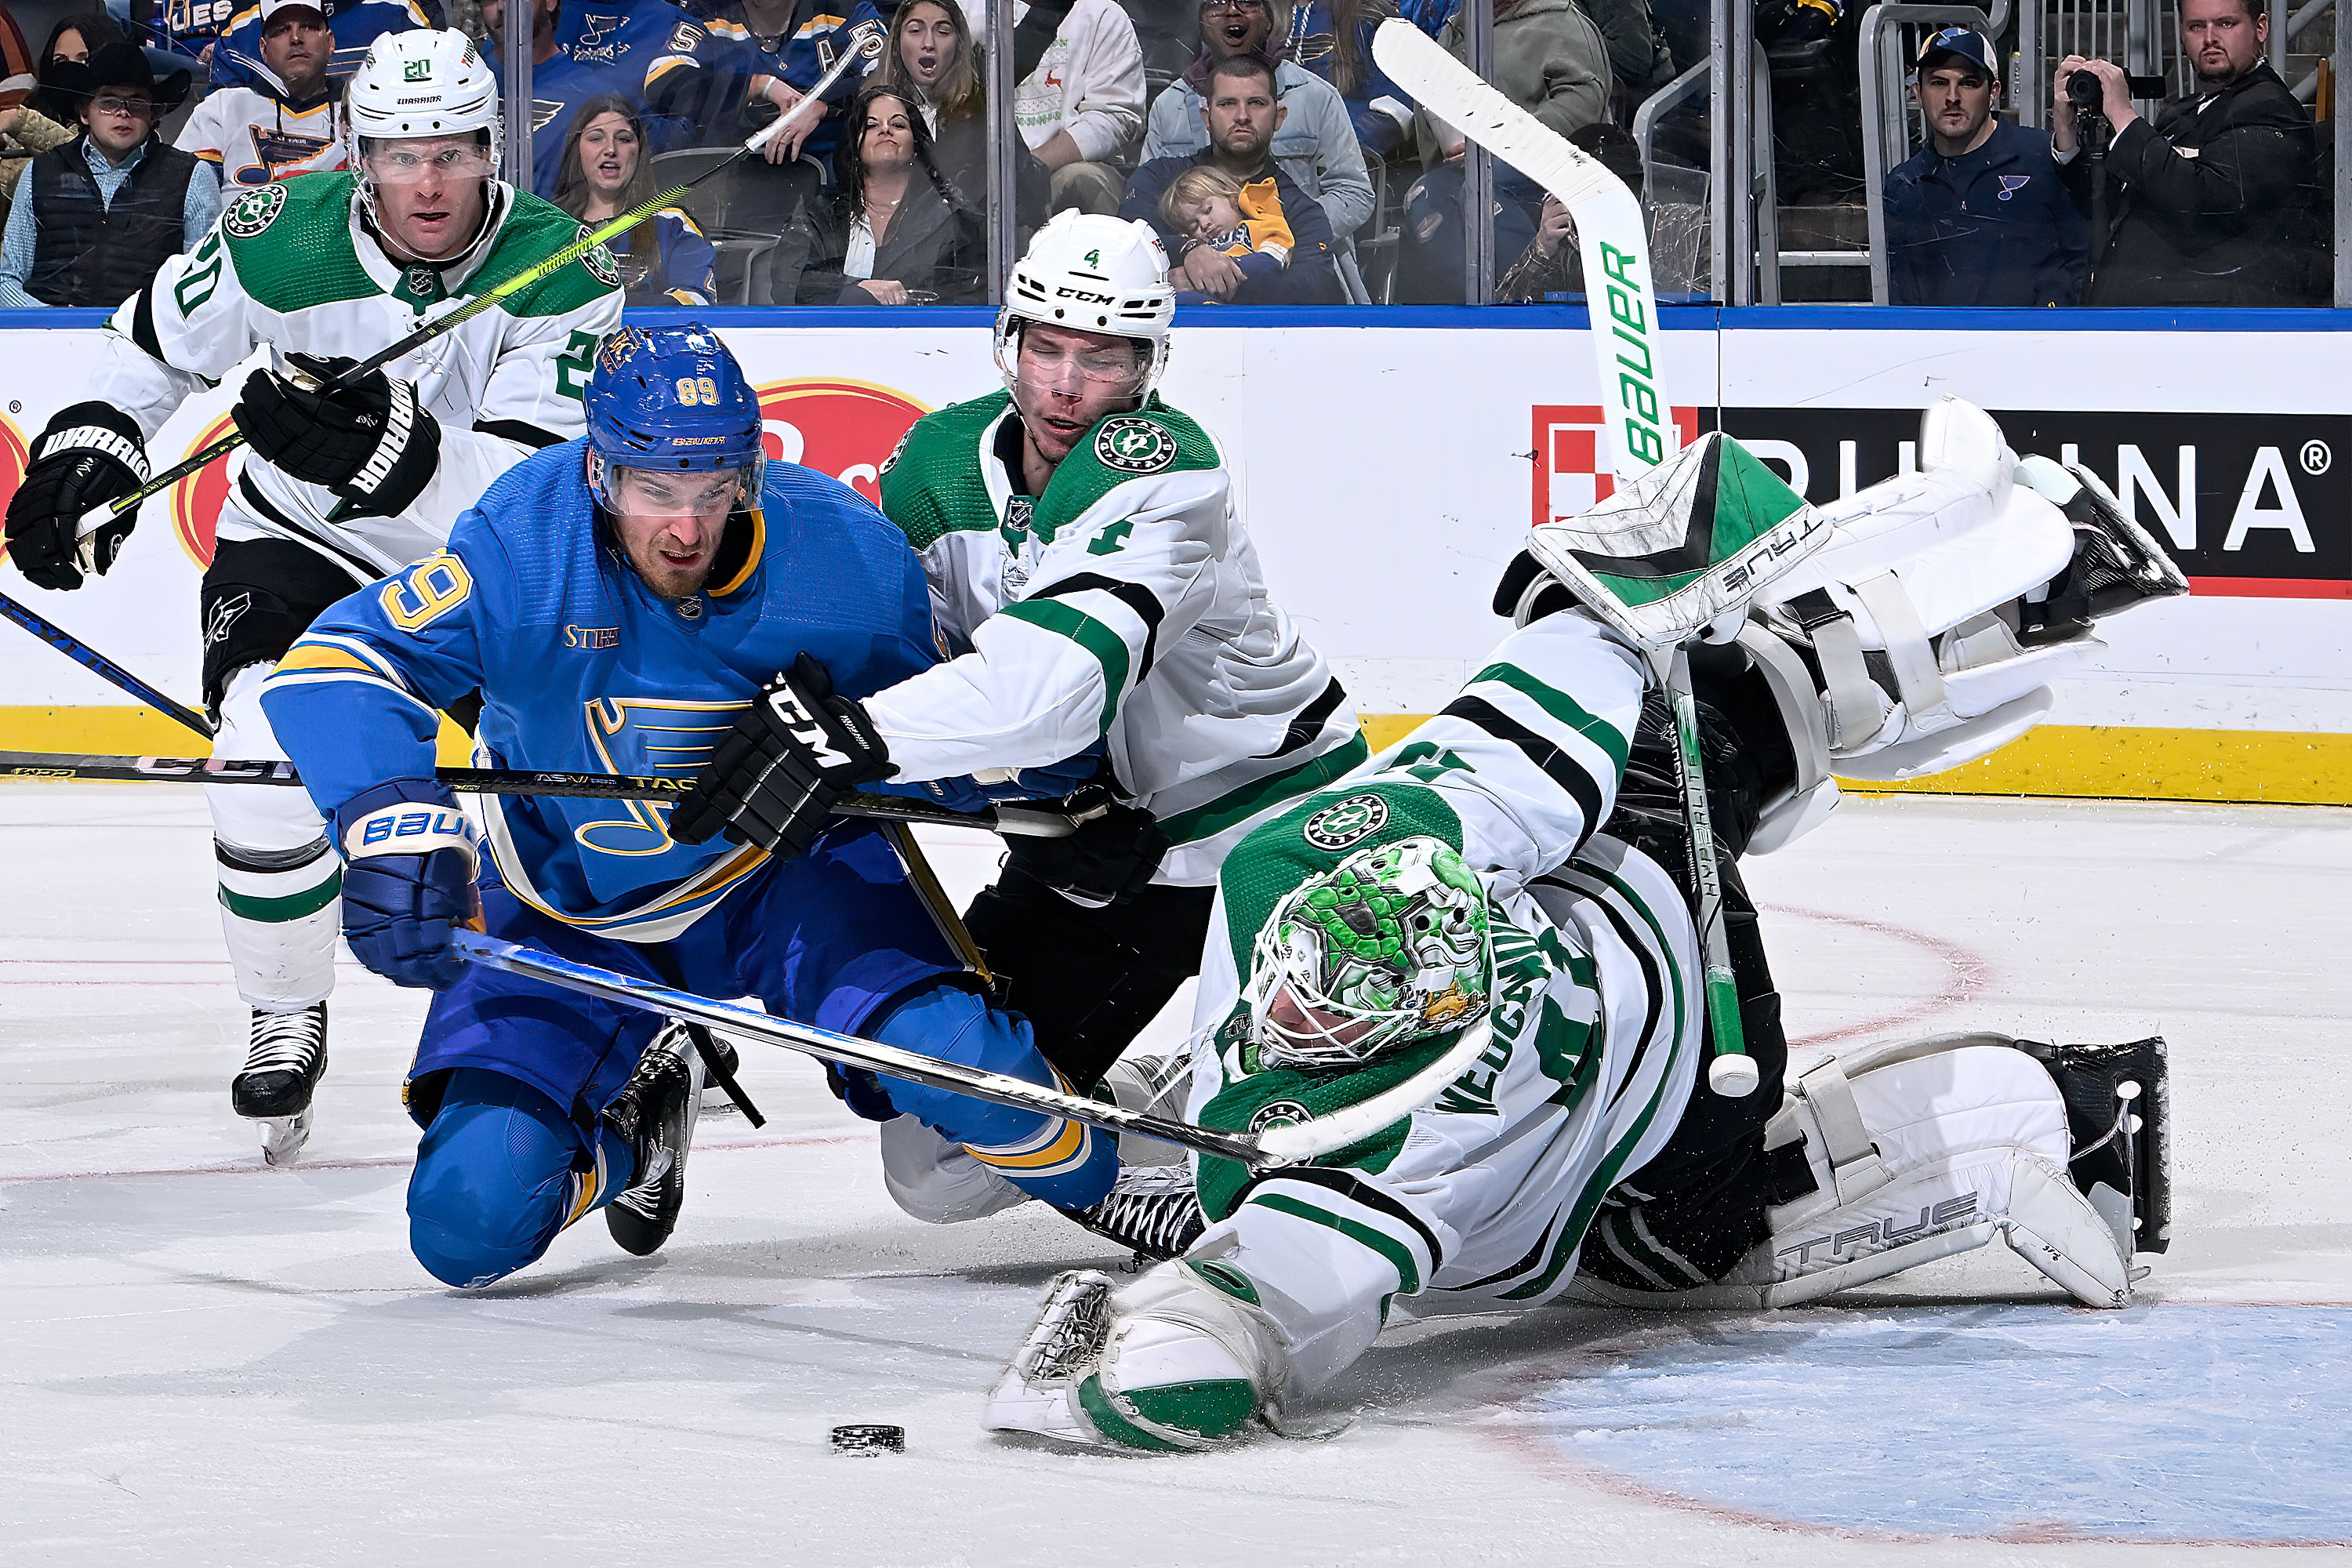 Miro Heiskanen #4 and Scott Wedgewood #41 of the Dallas Stars defend the net against Pavel Buchnevich #89 of the St. Louis Blues on December 16, 2023 at the Enterprise Center in St. Louis, Missouri. (From Getty)